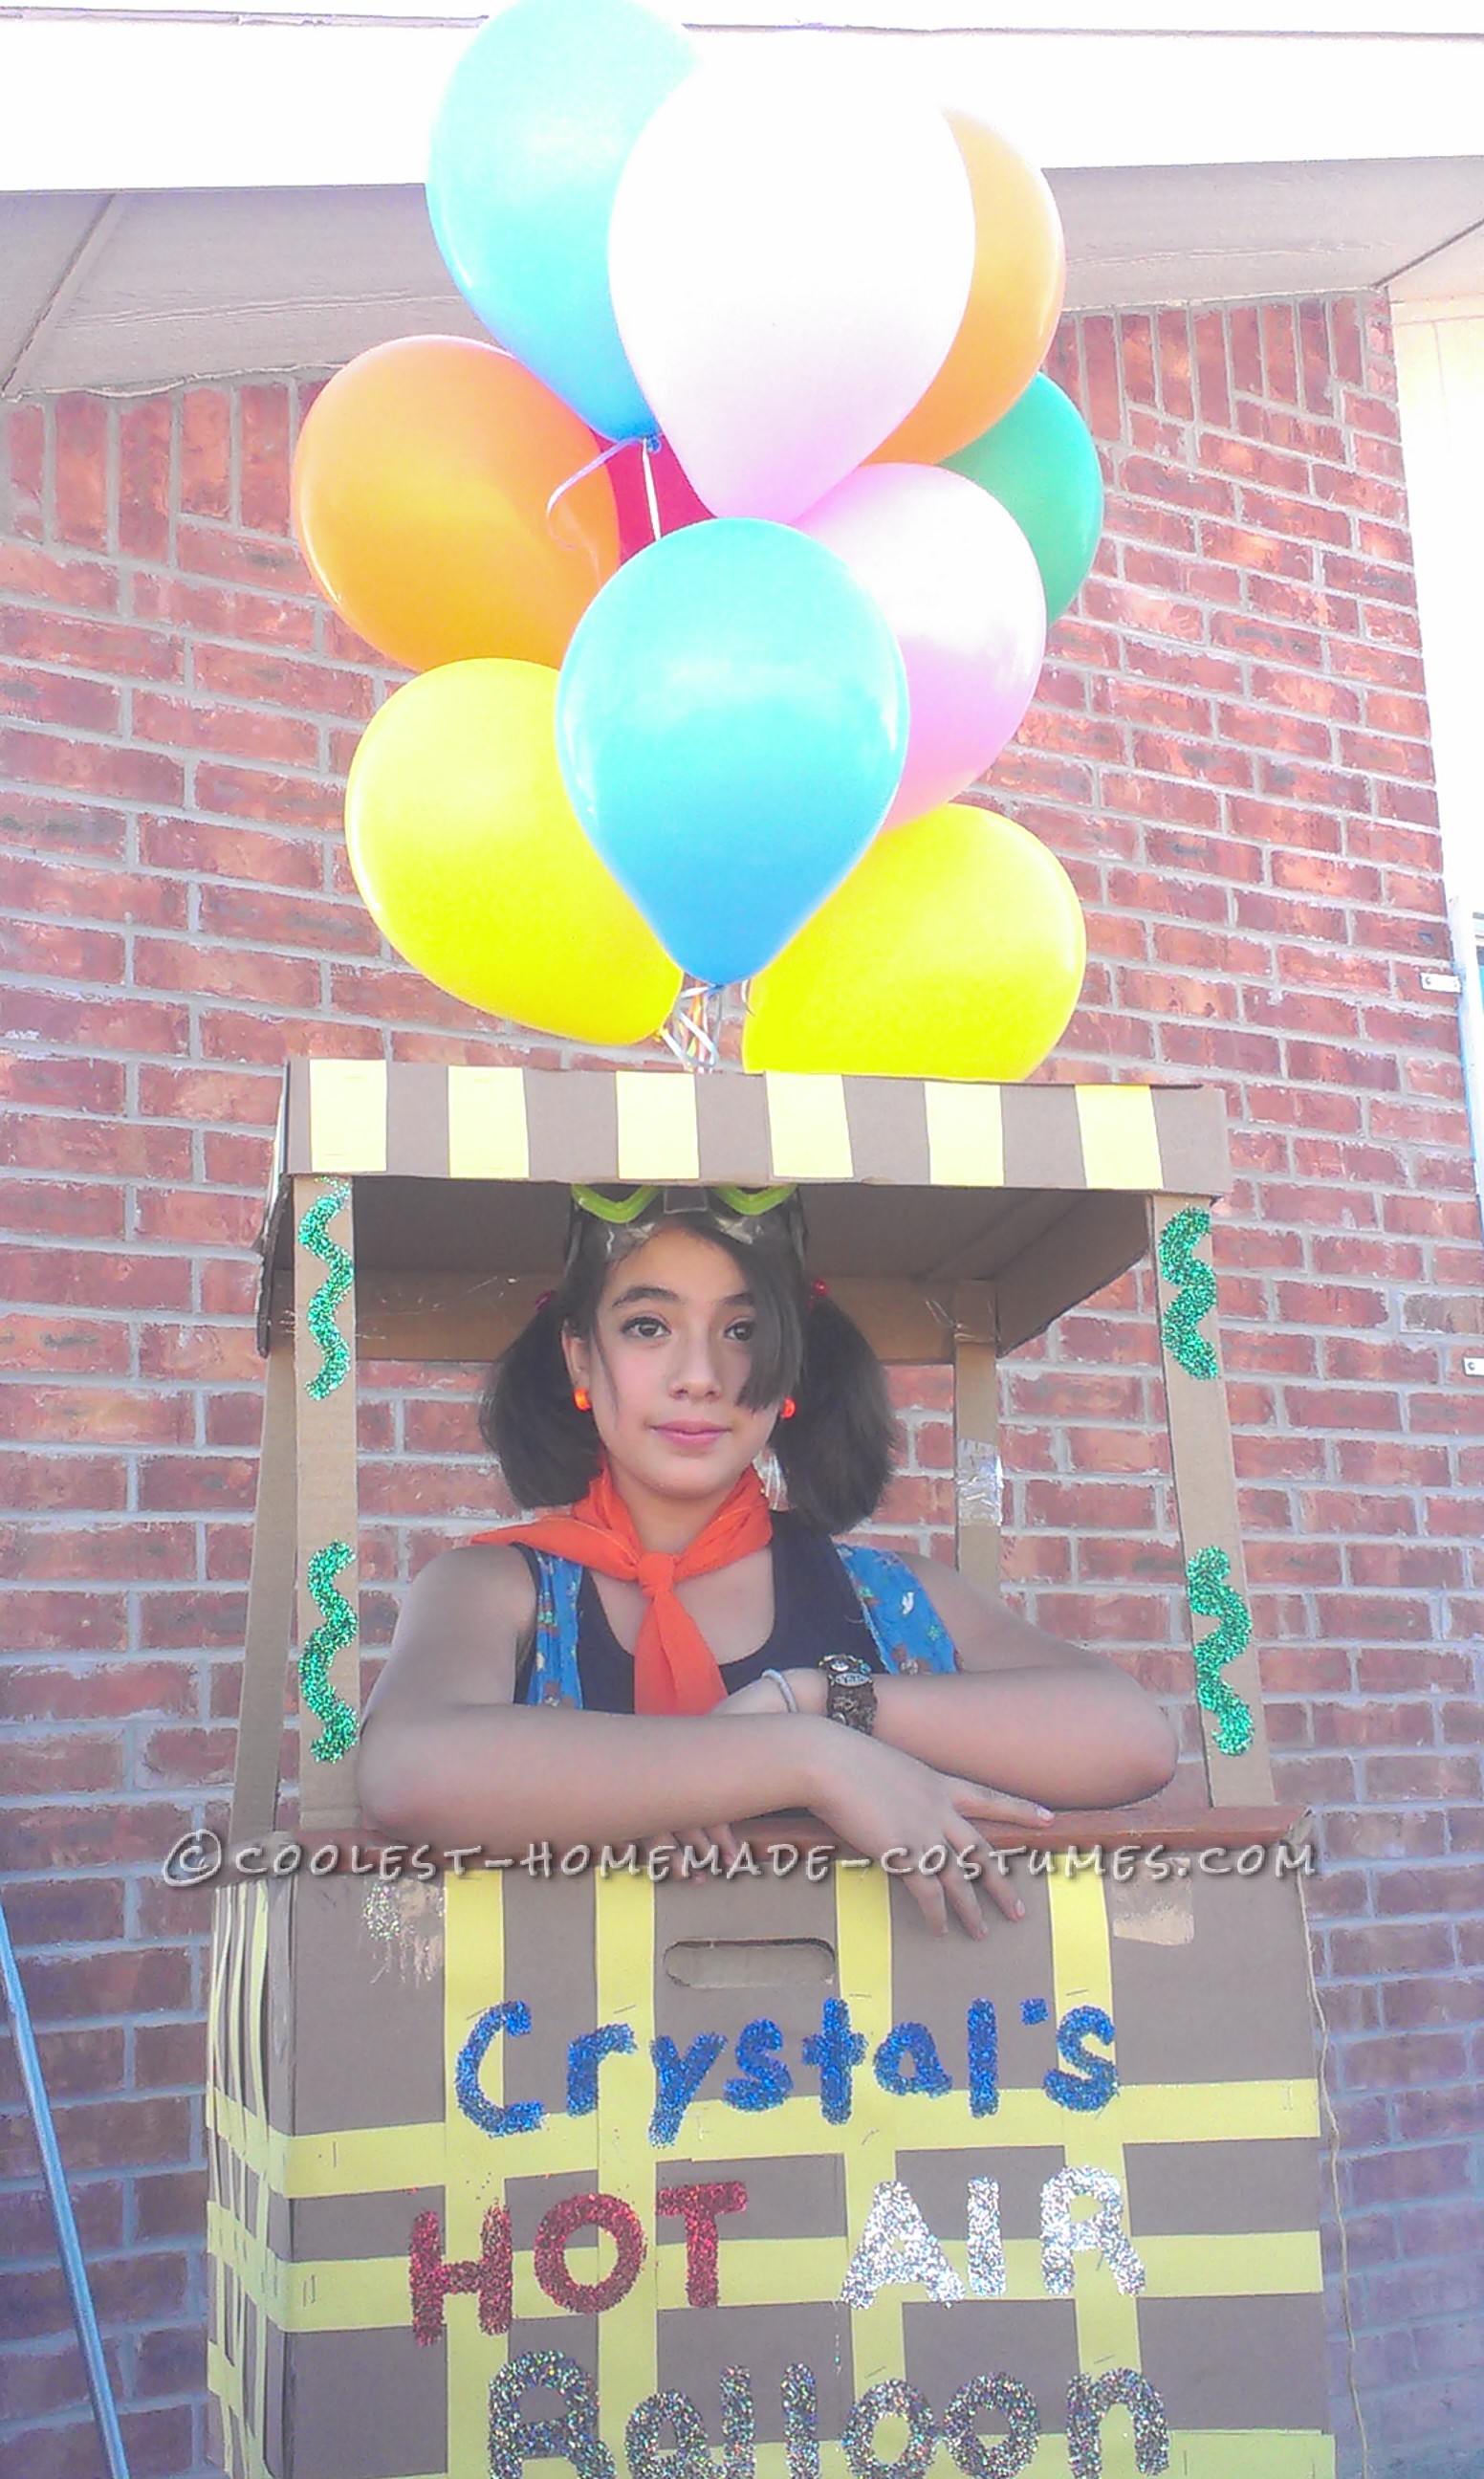 Homemade Hot Air Balloon Costume that Cost Nothing to Make!